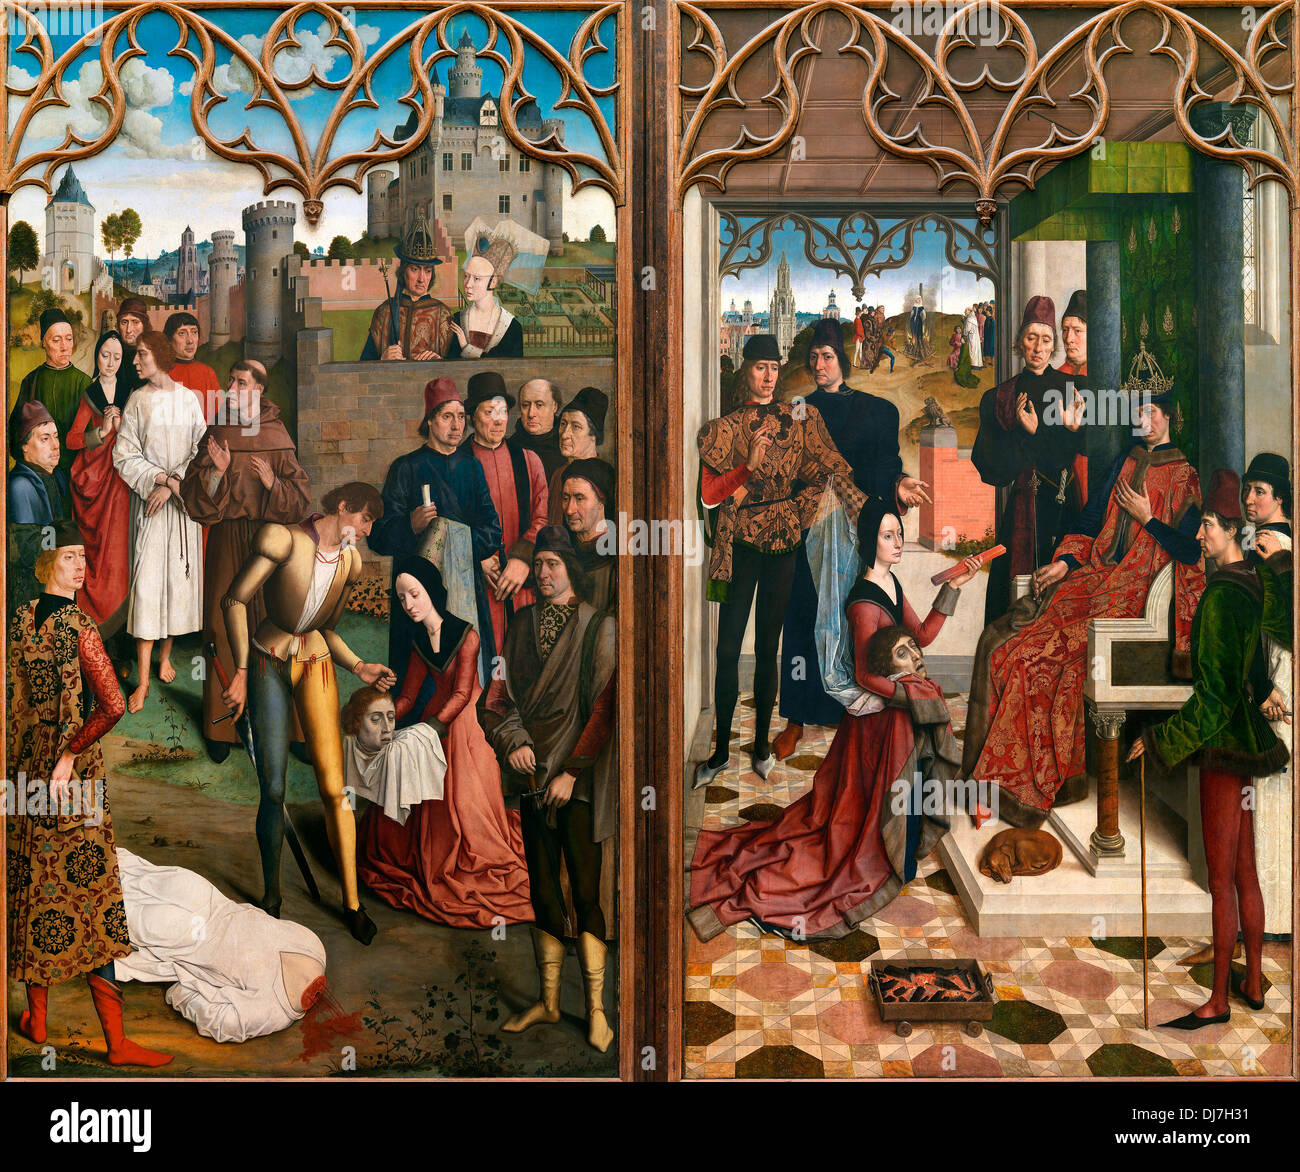 Dirk Bouts, Justice of Emperor Otto III: Beheading of the Innocent Count and Ordeal by Fire 1471-1475 Panel. Stock Photo